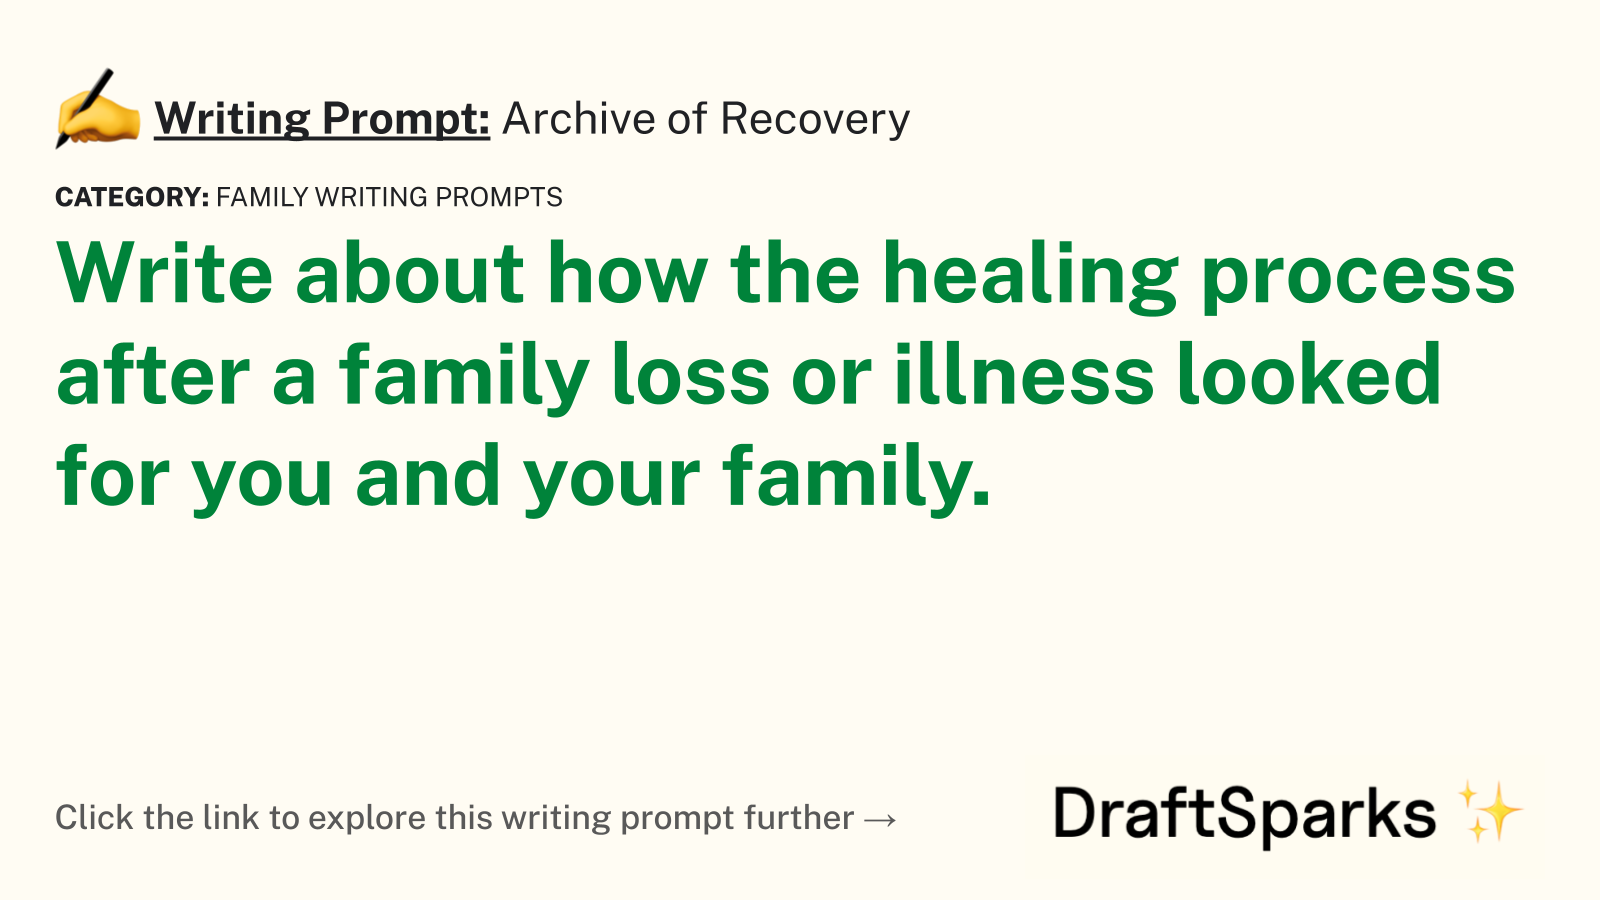 Archive of Recovery